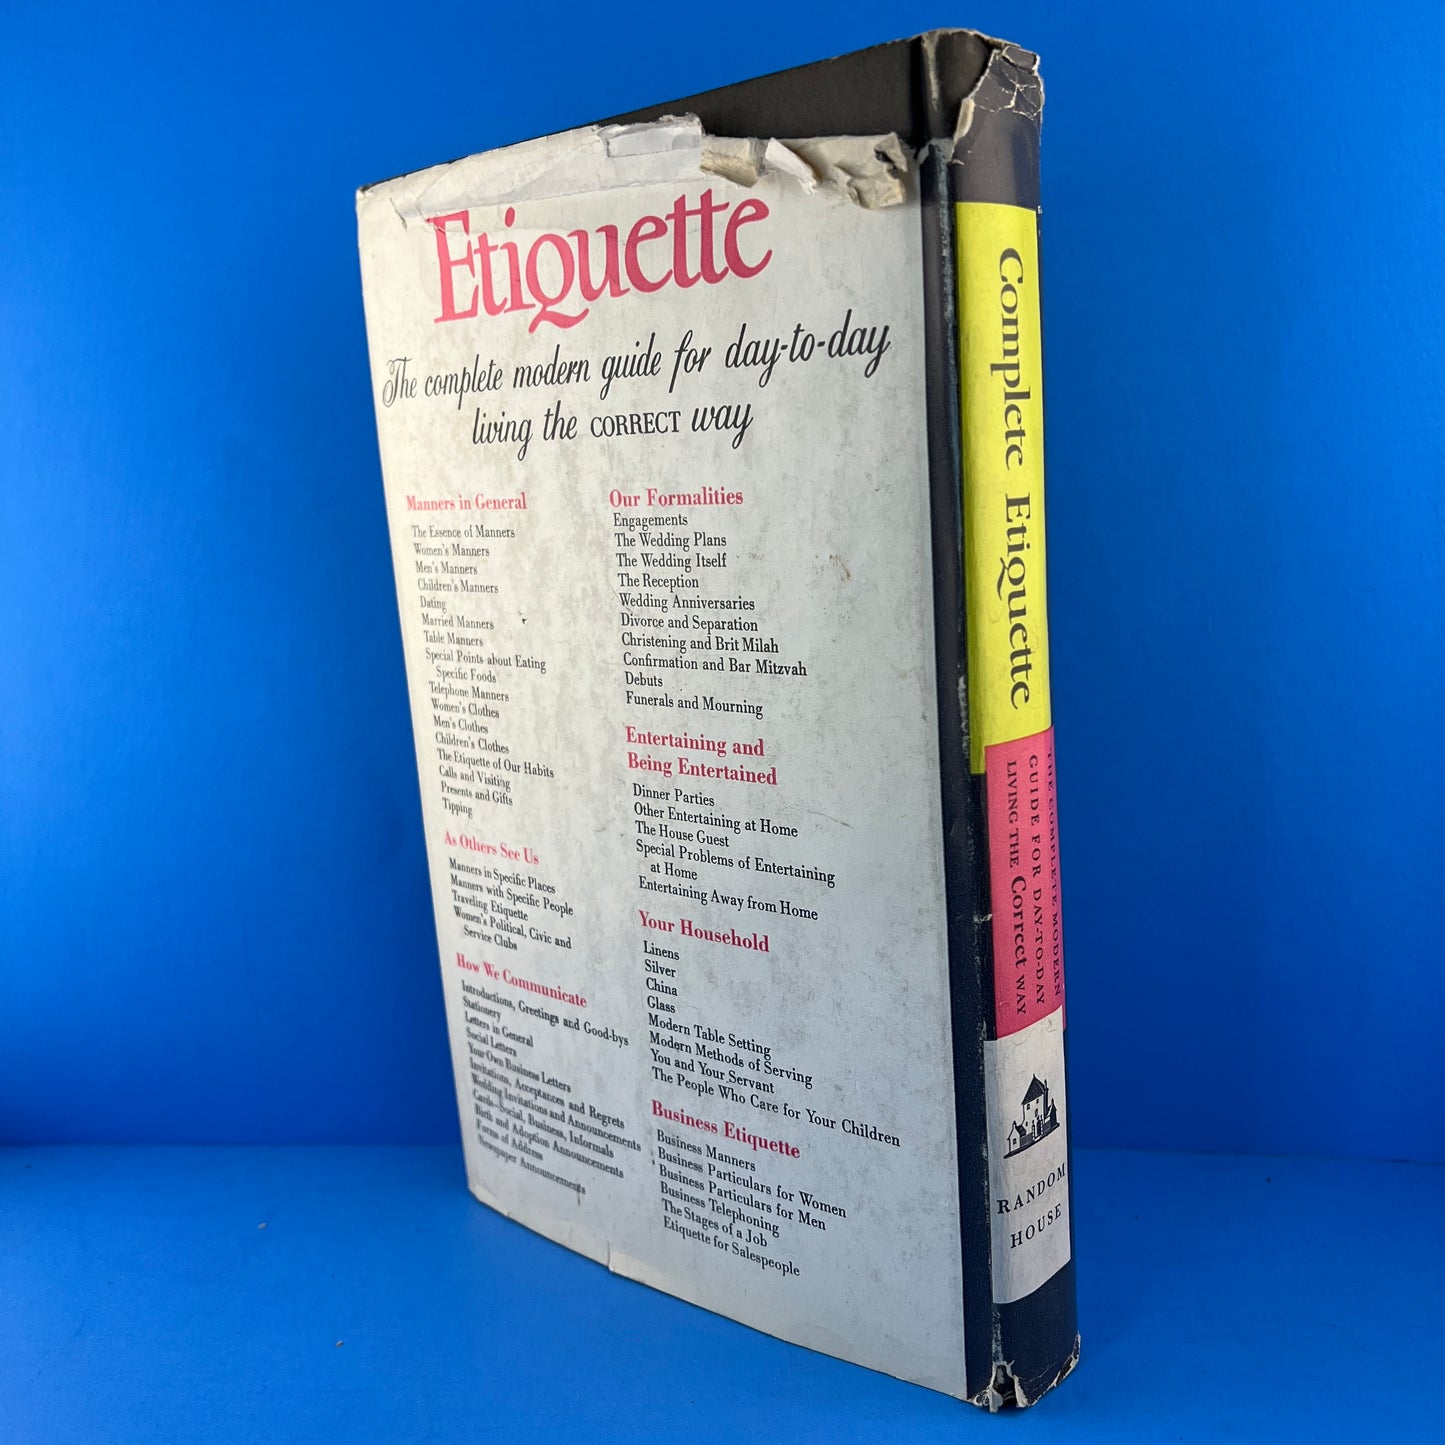 Complete Etiquette: The Complete Modern Guide for Day-to-Day Living the Correct Way